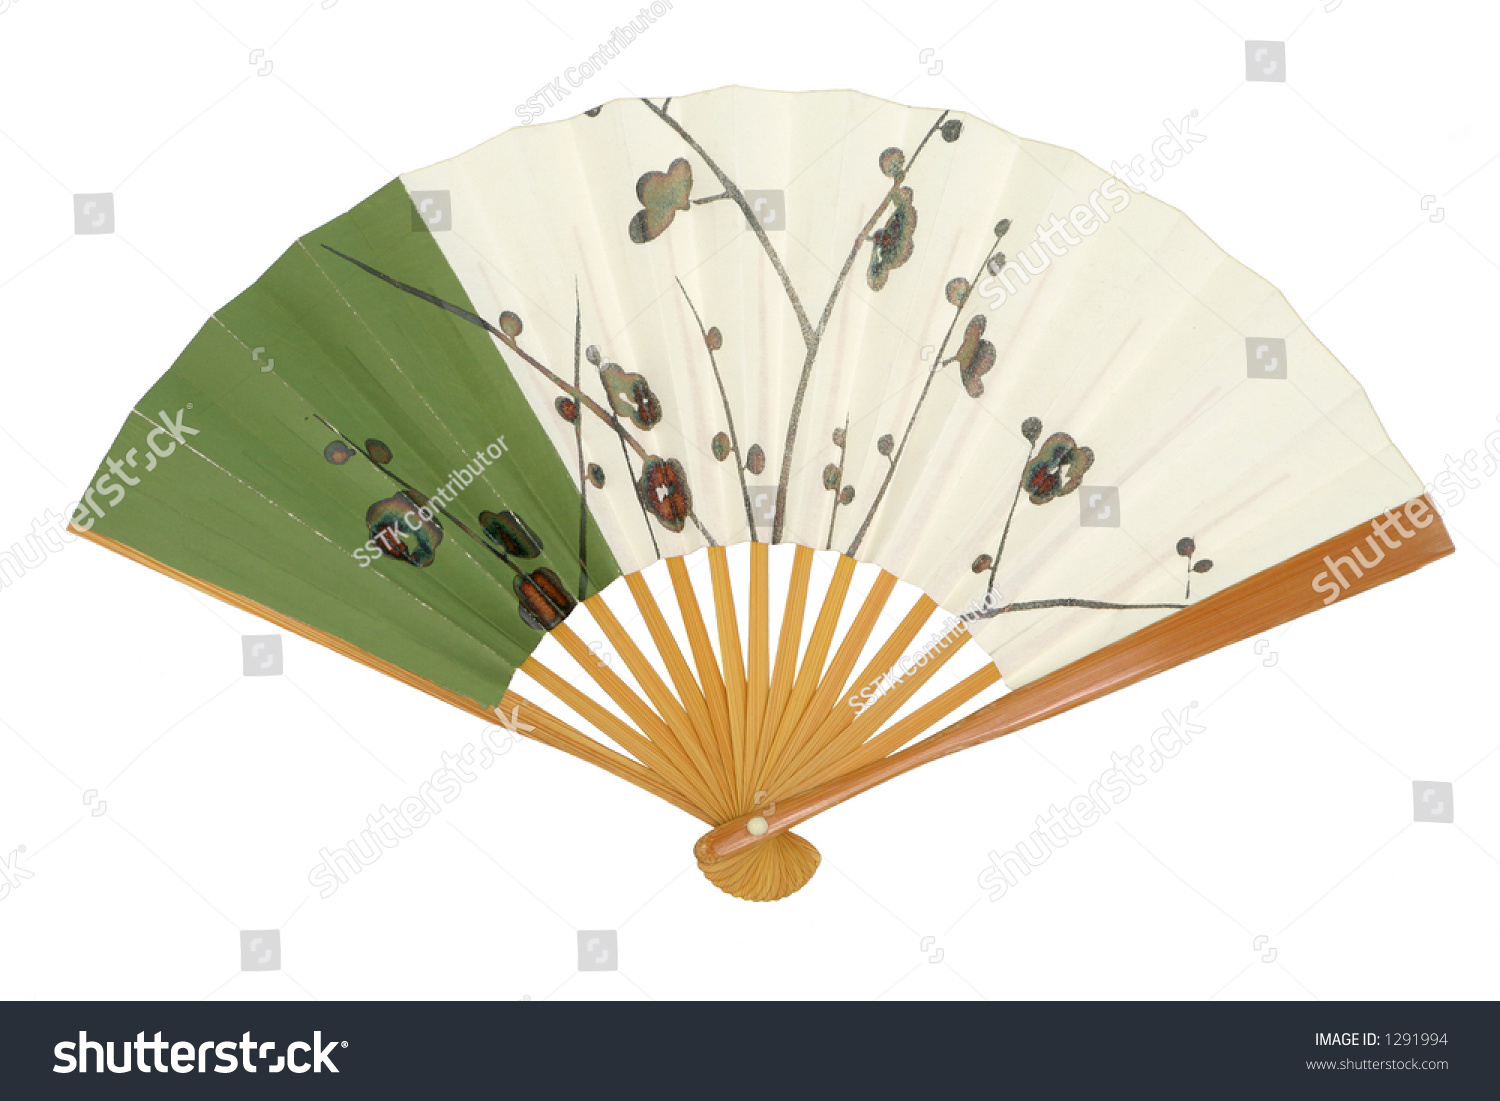 Japanese folding fan made of paper and bamboo. #1291994